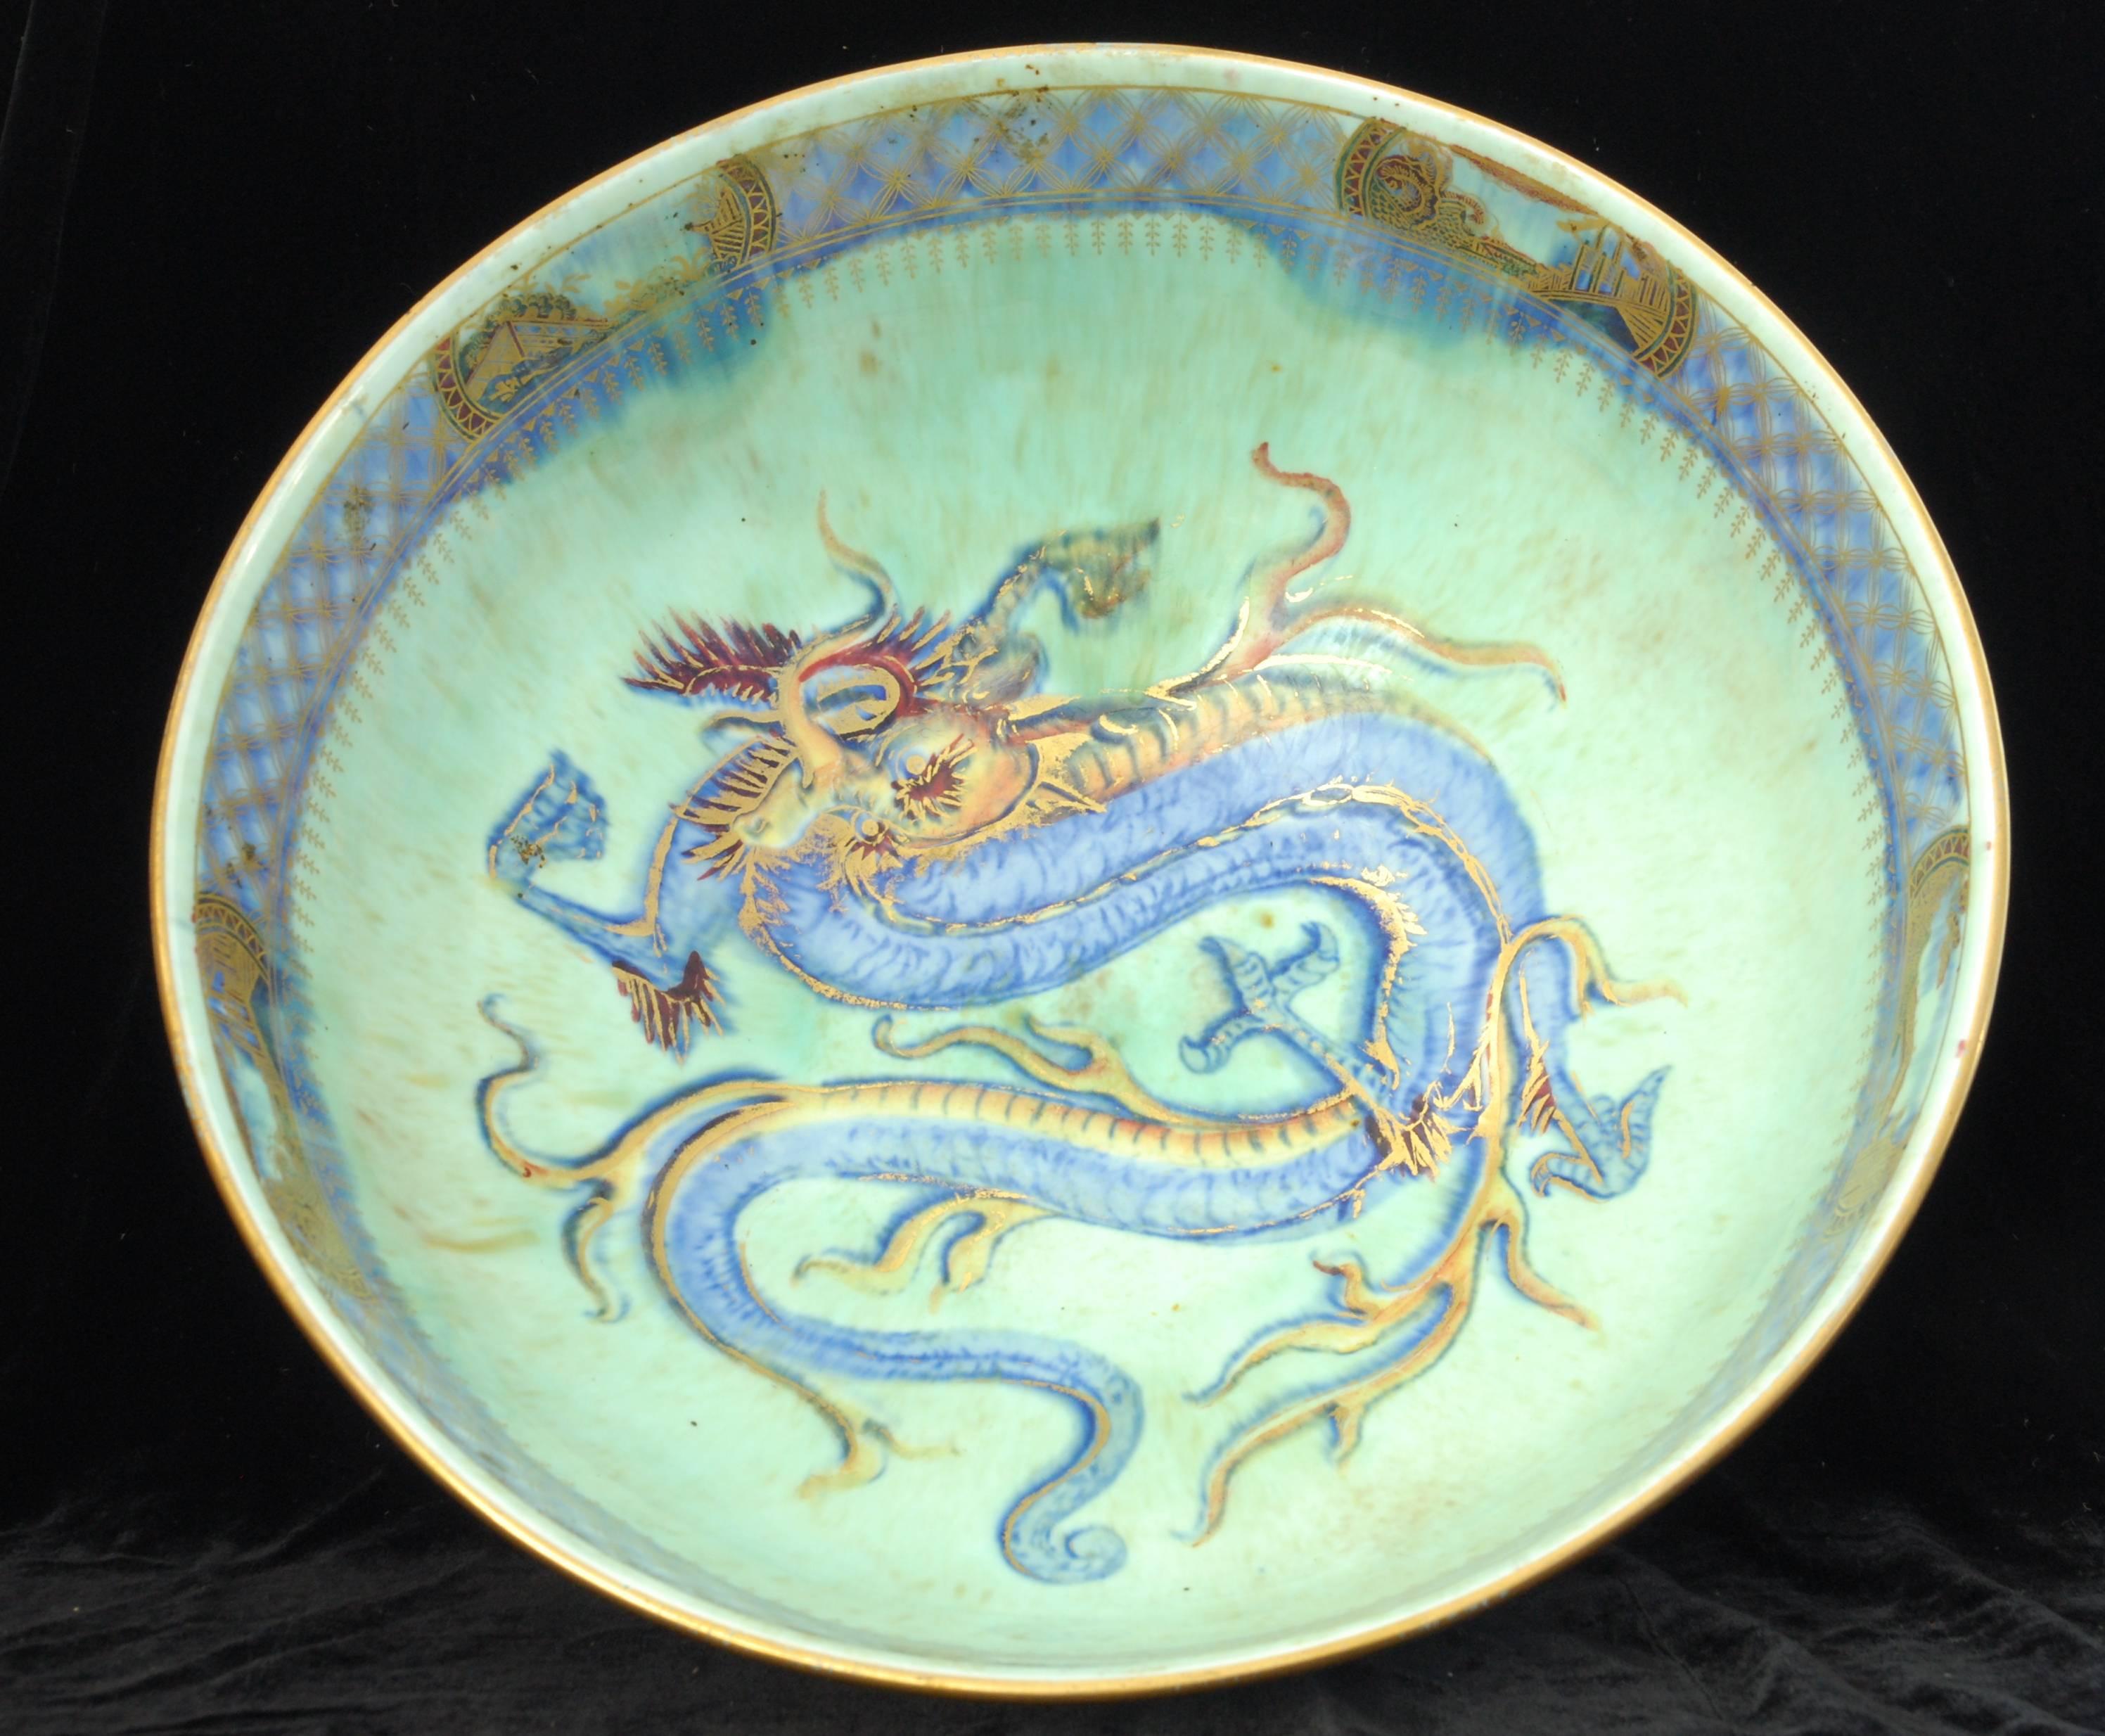 Enameled Lustre Punch Bowl with Dragons, Wedgwood, circa 1925